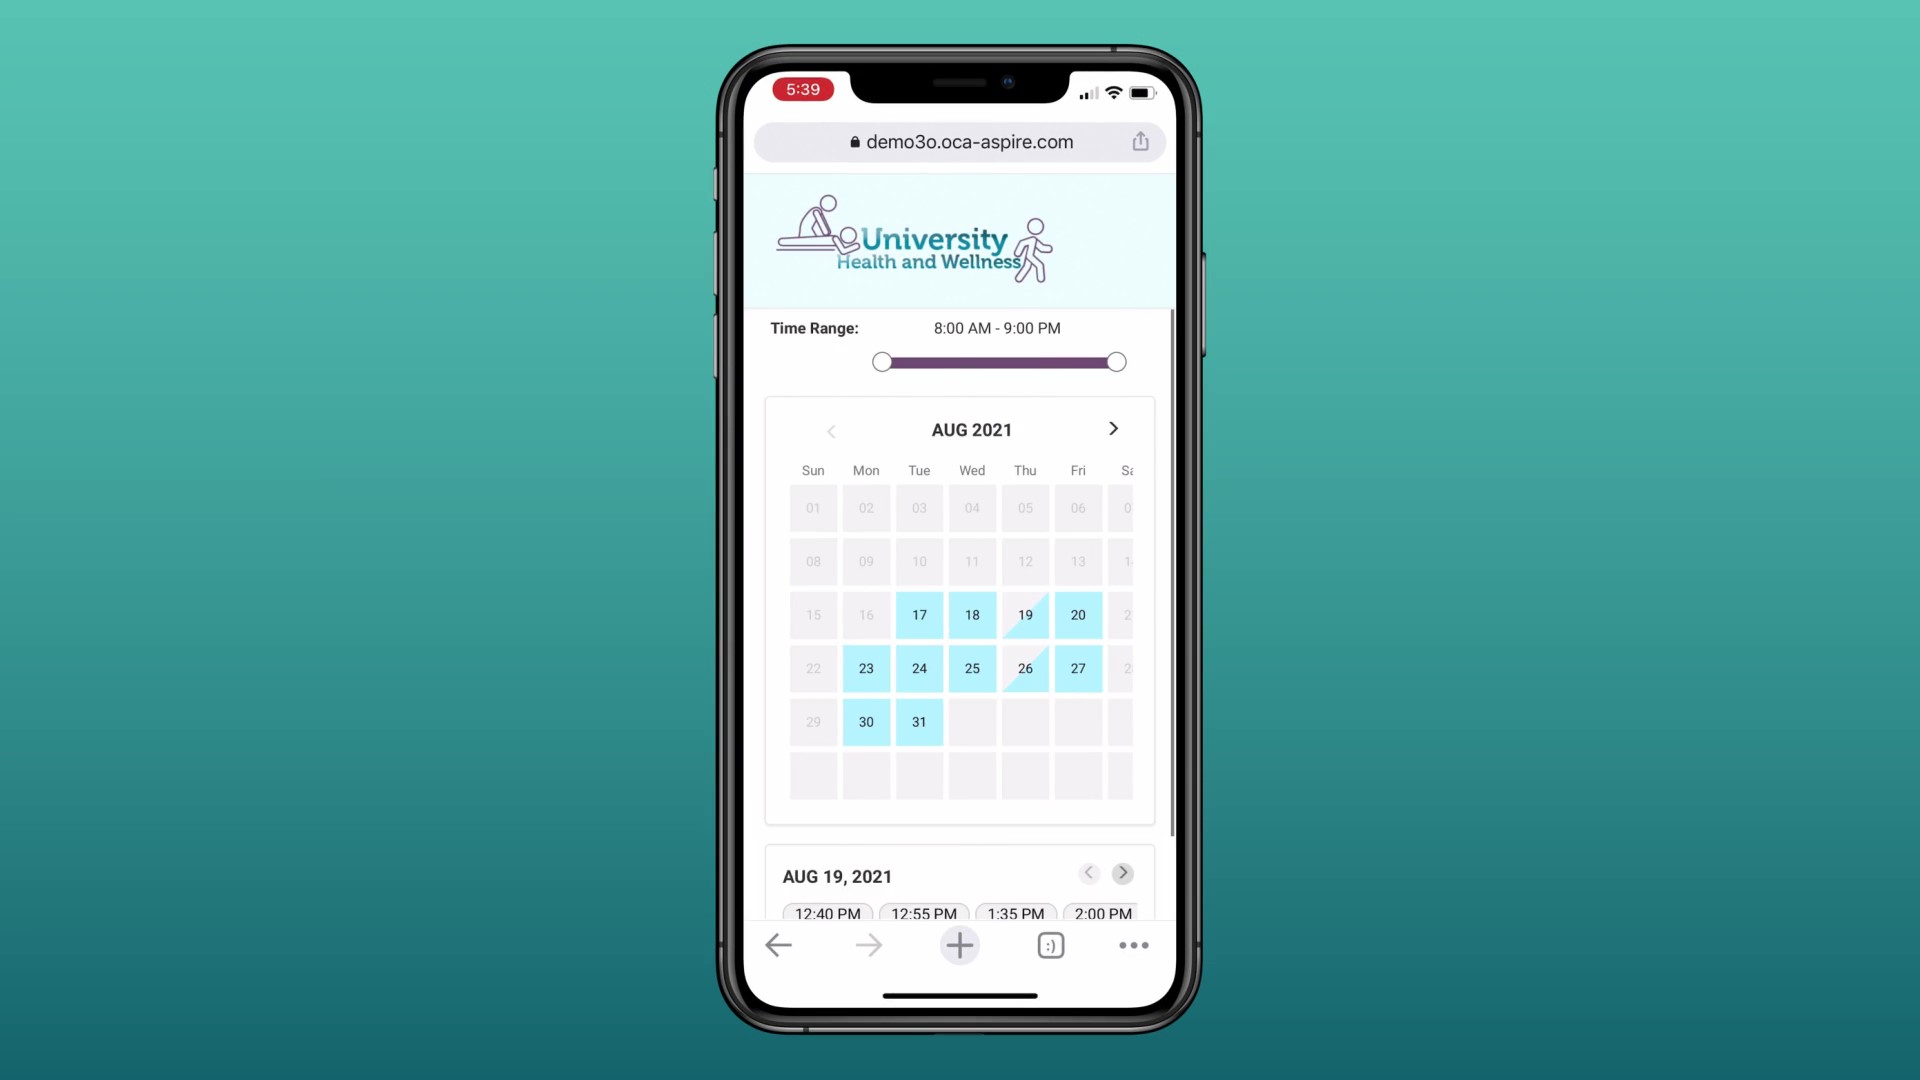 OCA Aspire online booking allows your patients to book one or multiple appointments quickly and easily by selecting the time and date range that works for them. Patients and health professionals alike have ranked this feature among their favourites.